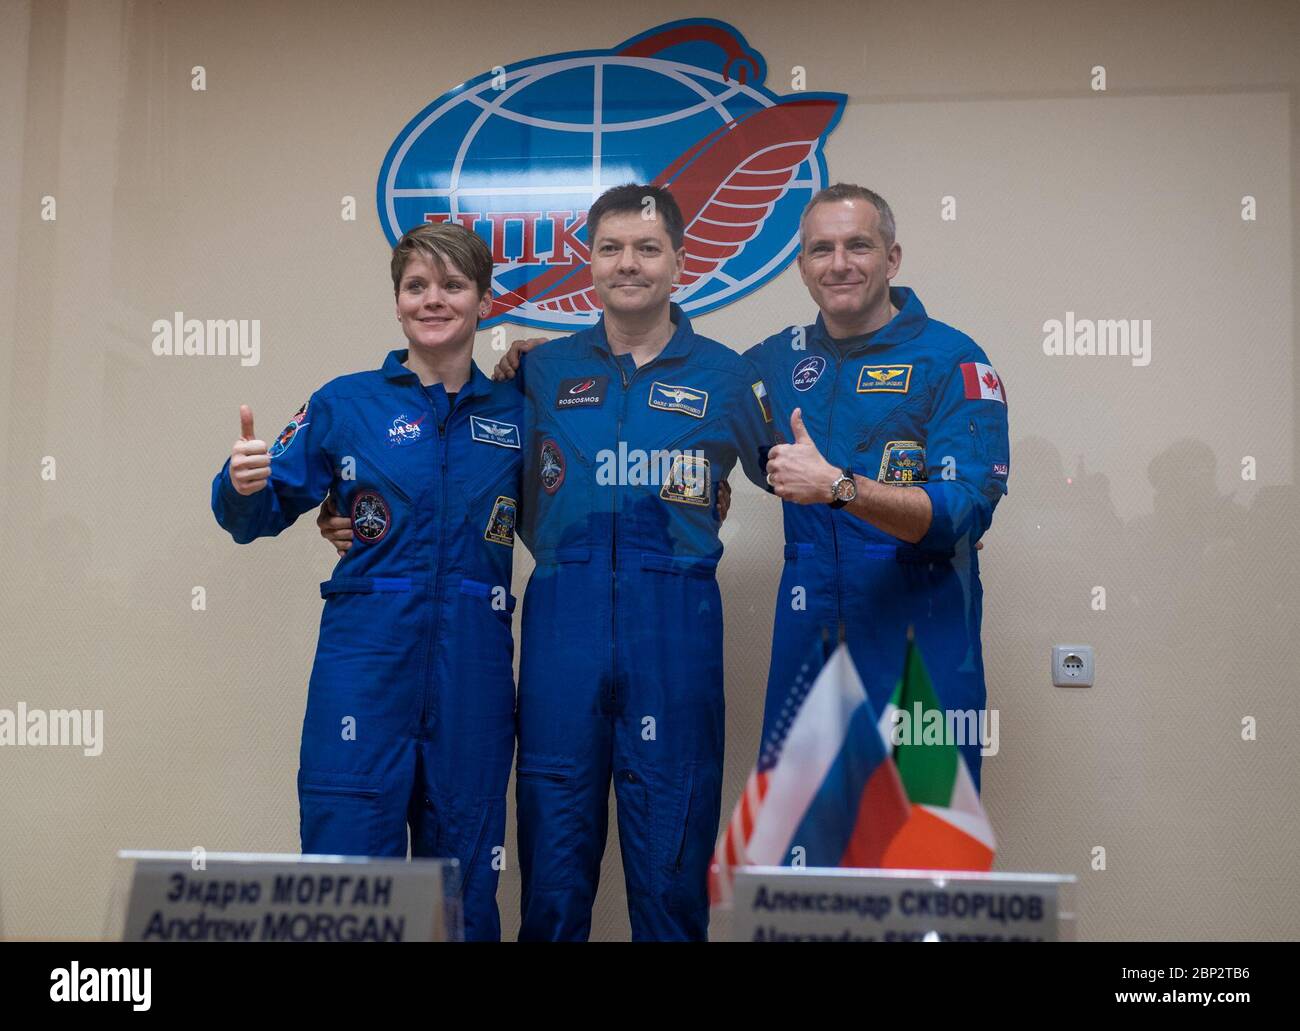 Expedition 58 Press Conference  Expedition 58 prime crew members, left to right, Flight Engineer Anne McClain of NASA, Soyuz Commander Oleg Kononenko of Roscosmos, and Flight Engineer David Saint-Jacques of the Canadian Space Agency (CSA) pose for a photo at the conclusion of a press conference, Sunday, Dec. 2, 2018 at the Cosmonaut Hotel in Baikonur, Kazakhstan. Launch of the Soyuz rocket is scheduled for Dec. 3 and will carry Kononenko, McClain, and Saint-Jacques into orbit to begin their six and a half month mission on the International Space Station. Stock Photo